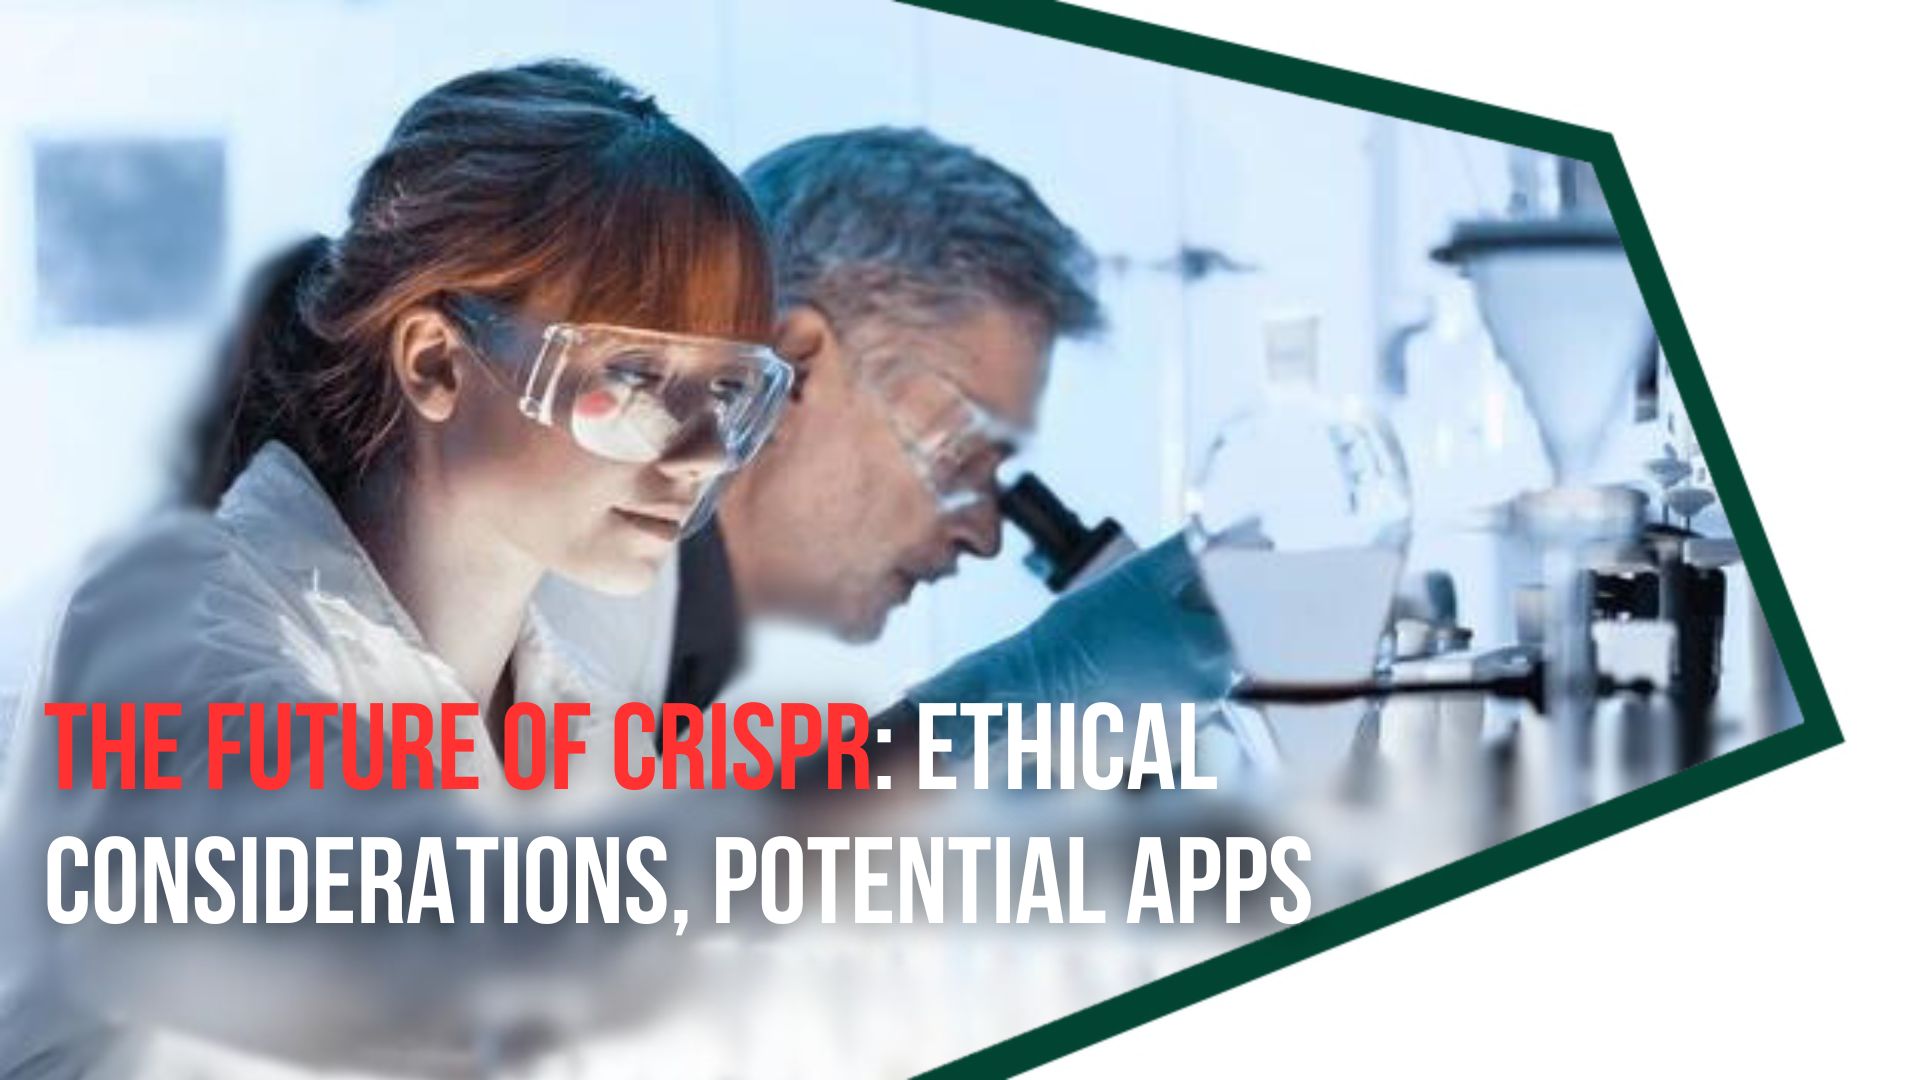 The Future of CRISPR: Ethical Considerations, Potential Apps